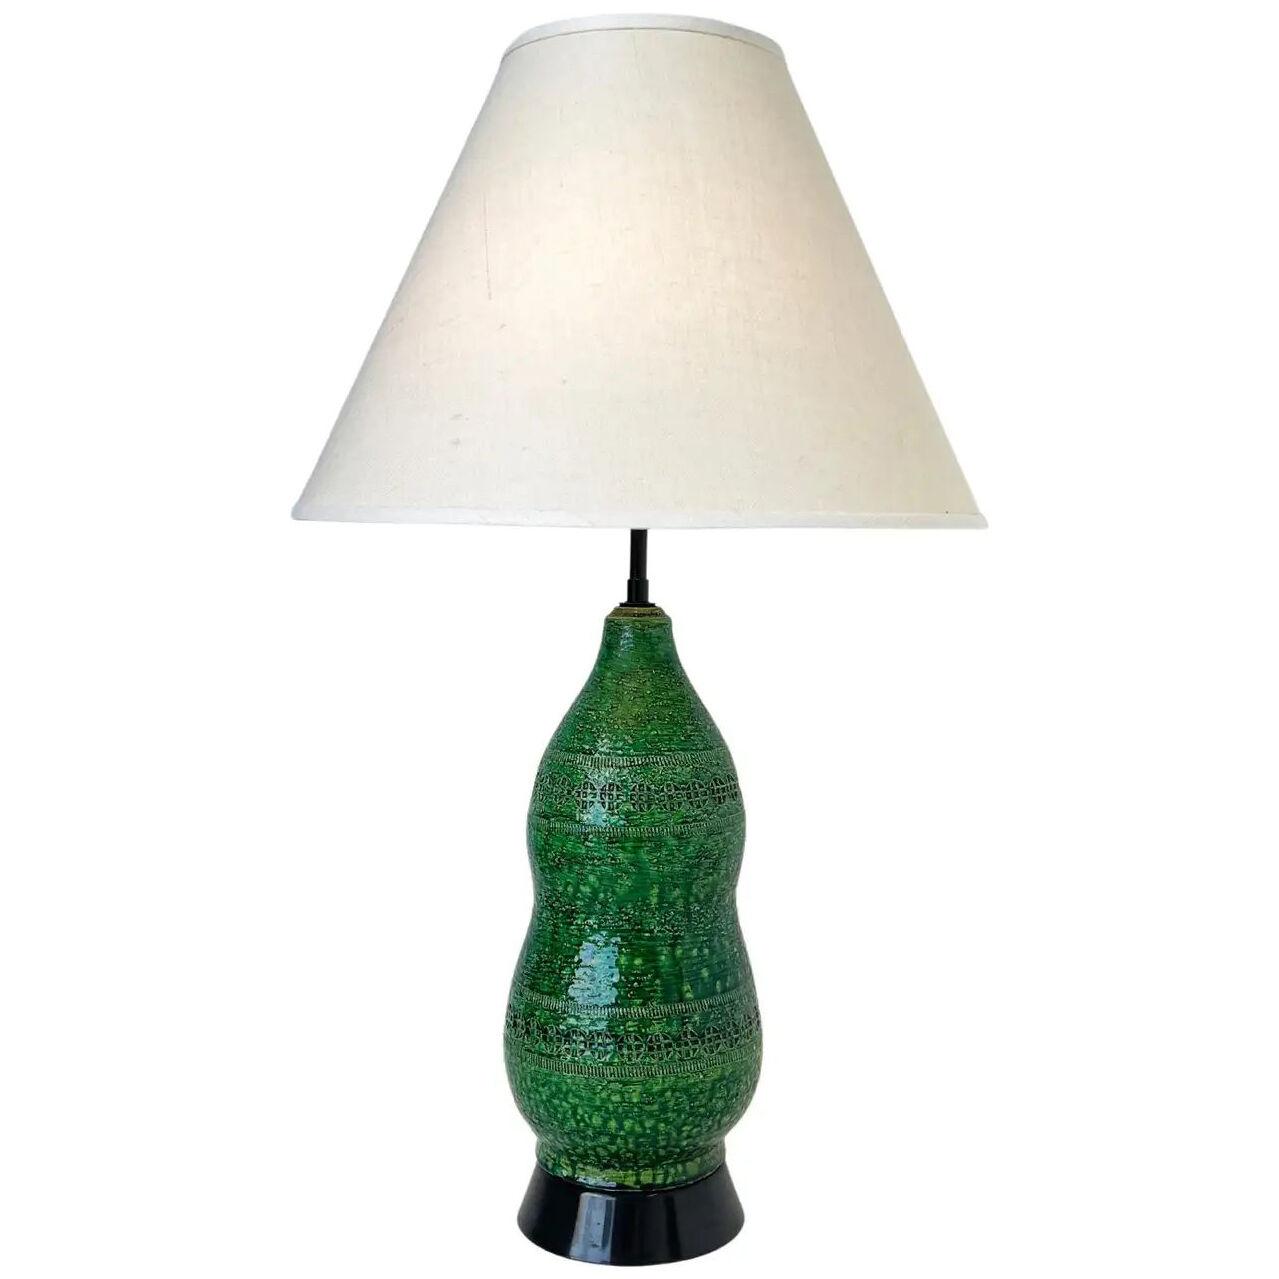 Italian Green Ceramic and Black Lacquered Table Lamp by Bitossi